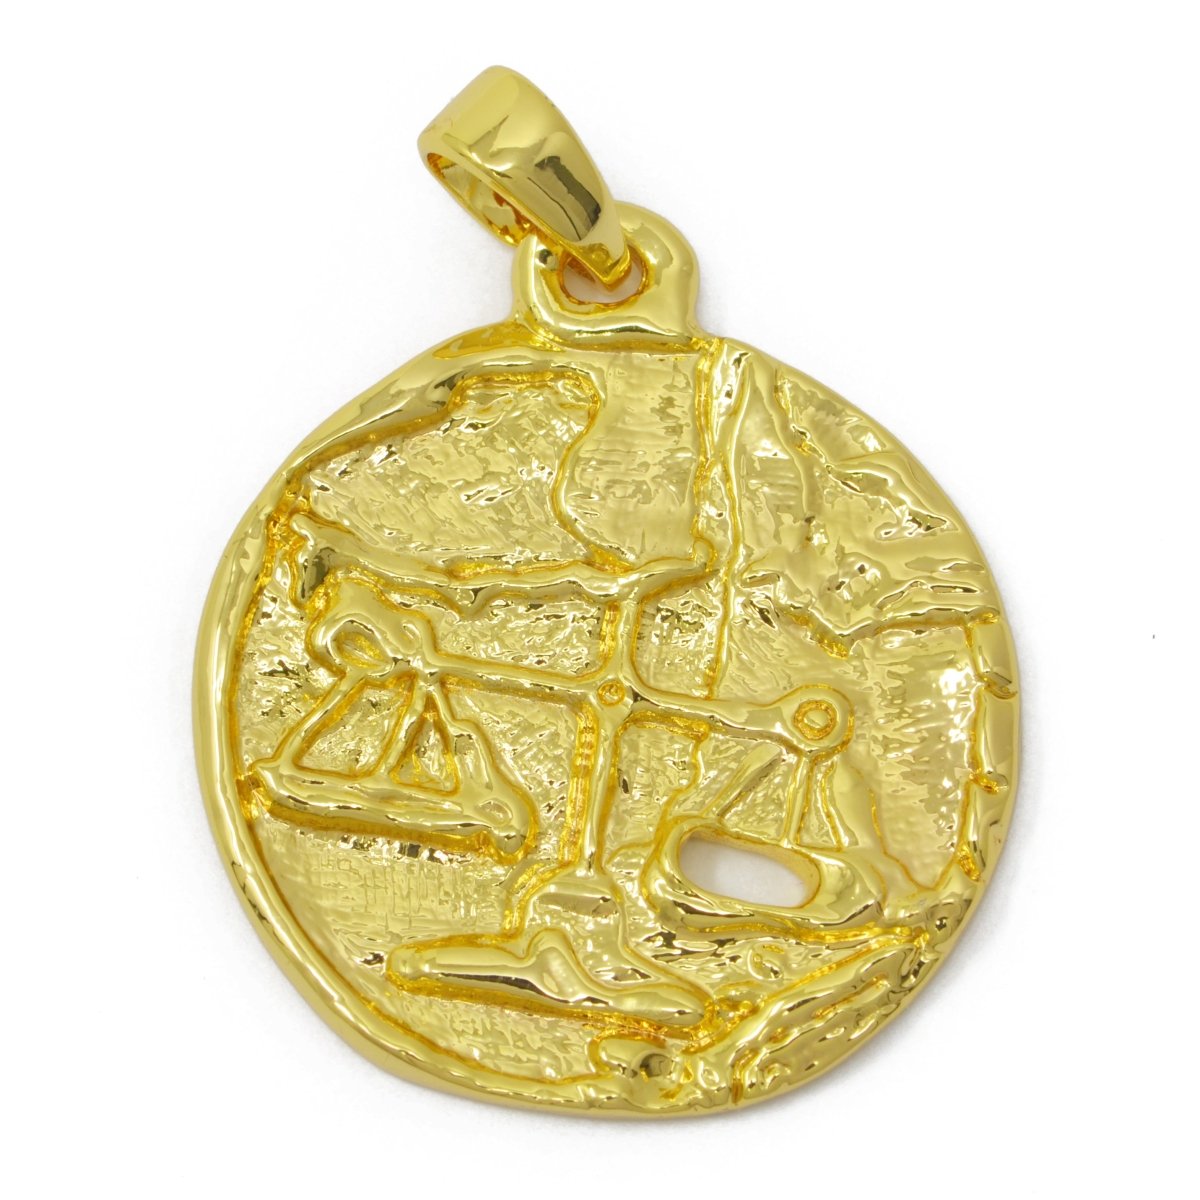 24K Gold Filled Zodiac Horoscope Sign Constellation Medallion Pendant Charm Rustic Rough Hammered Coin, A-638-A-650 - DLUXCA